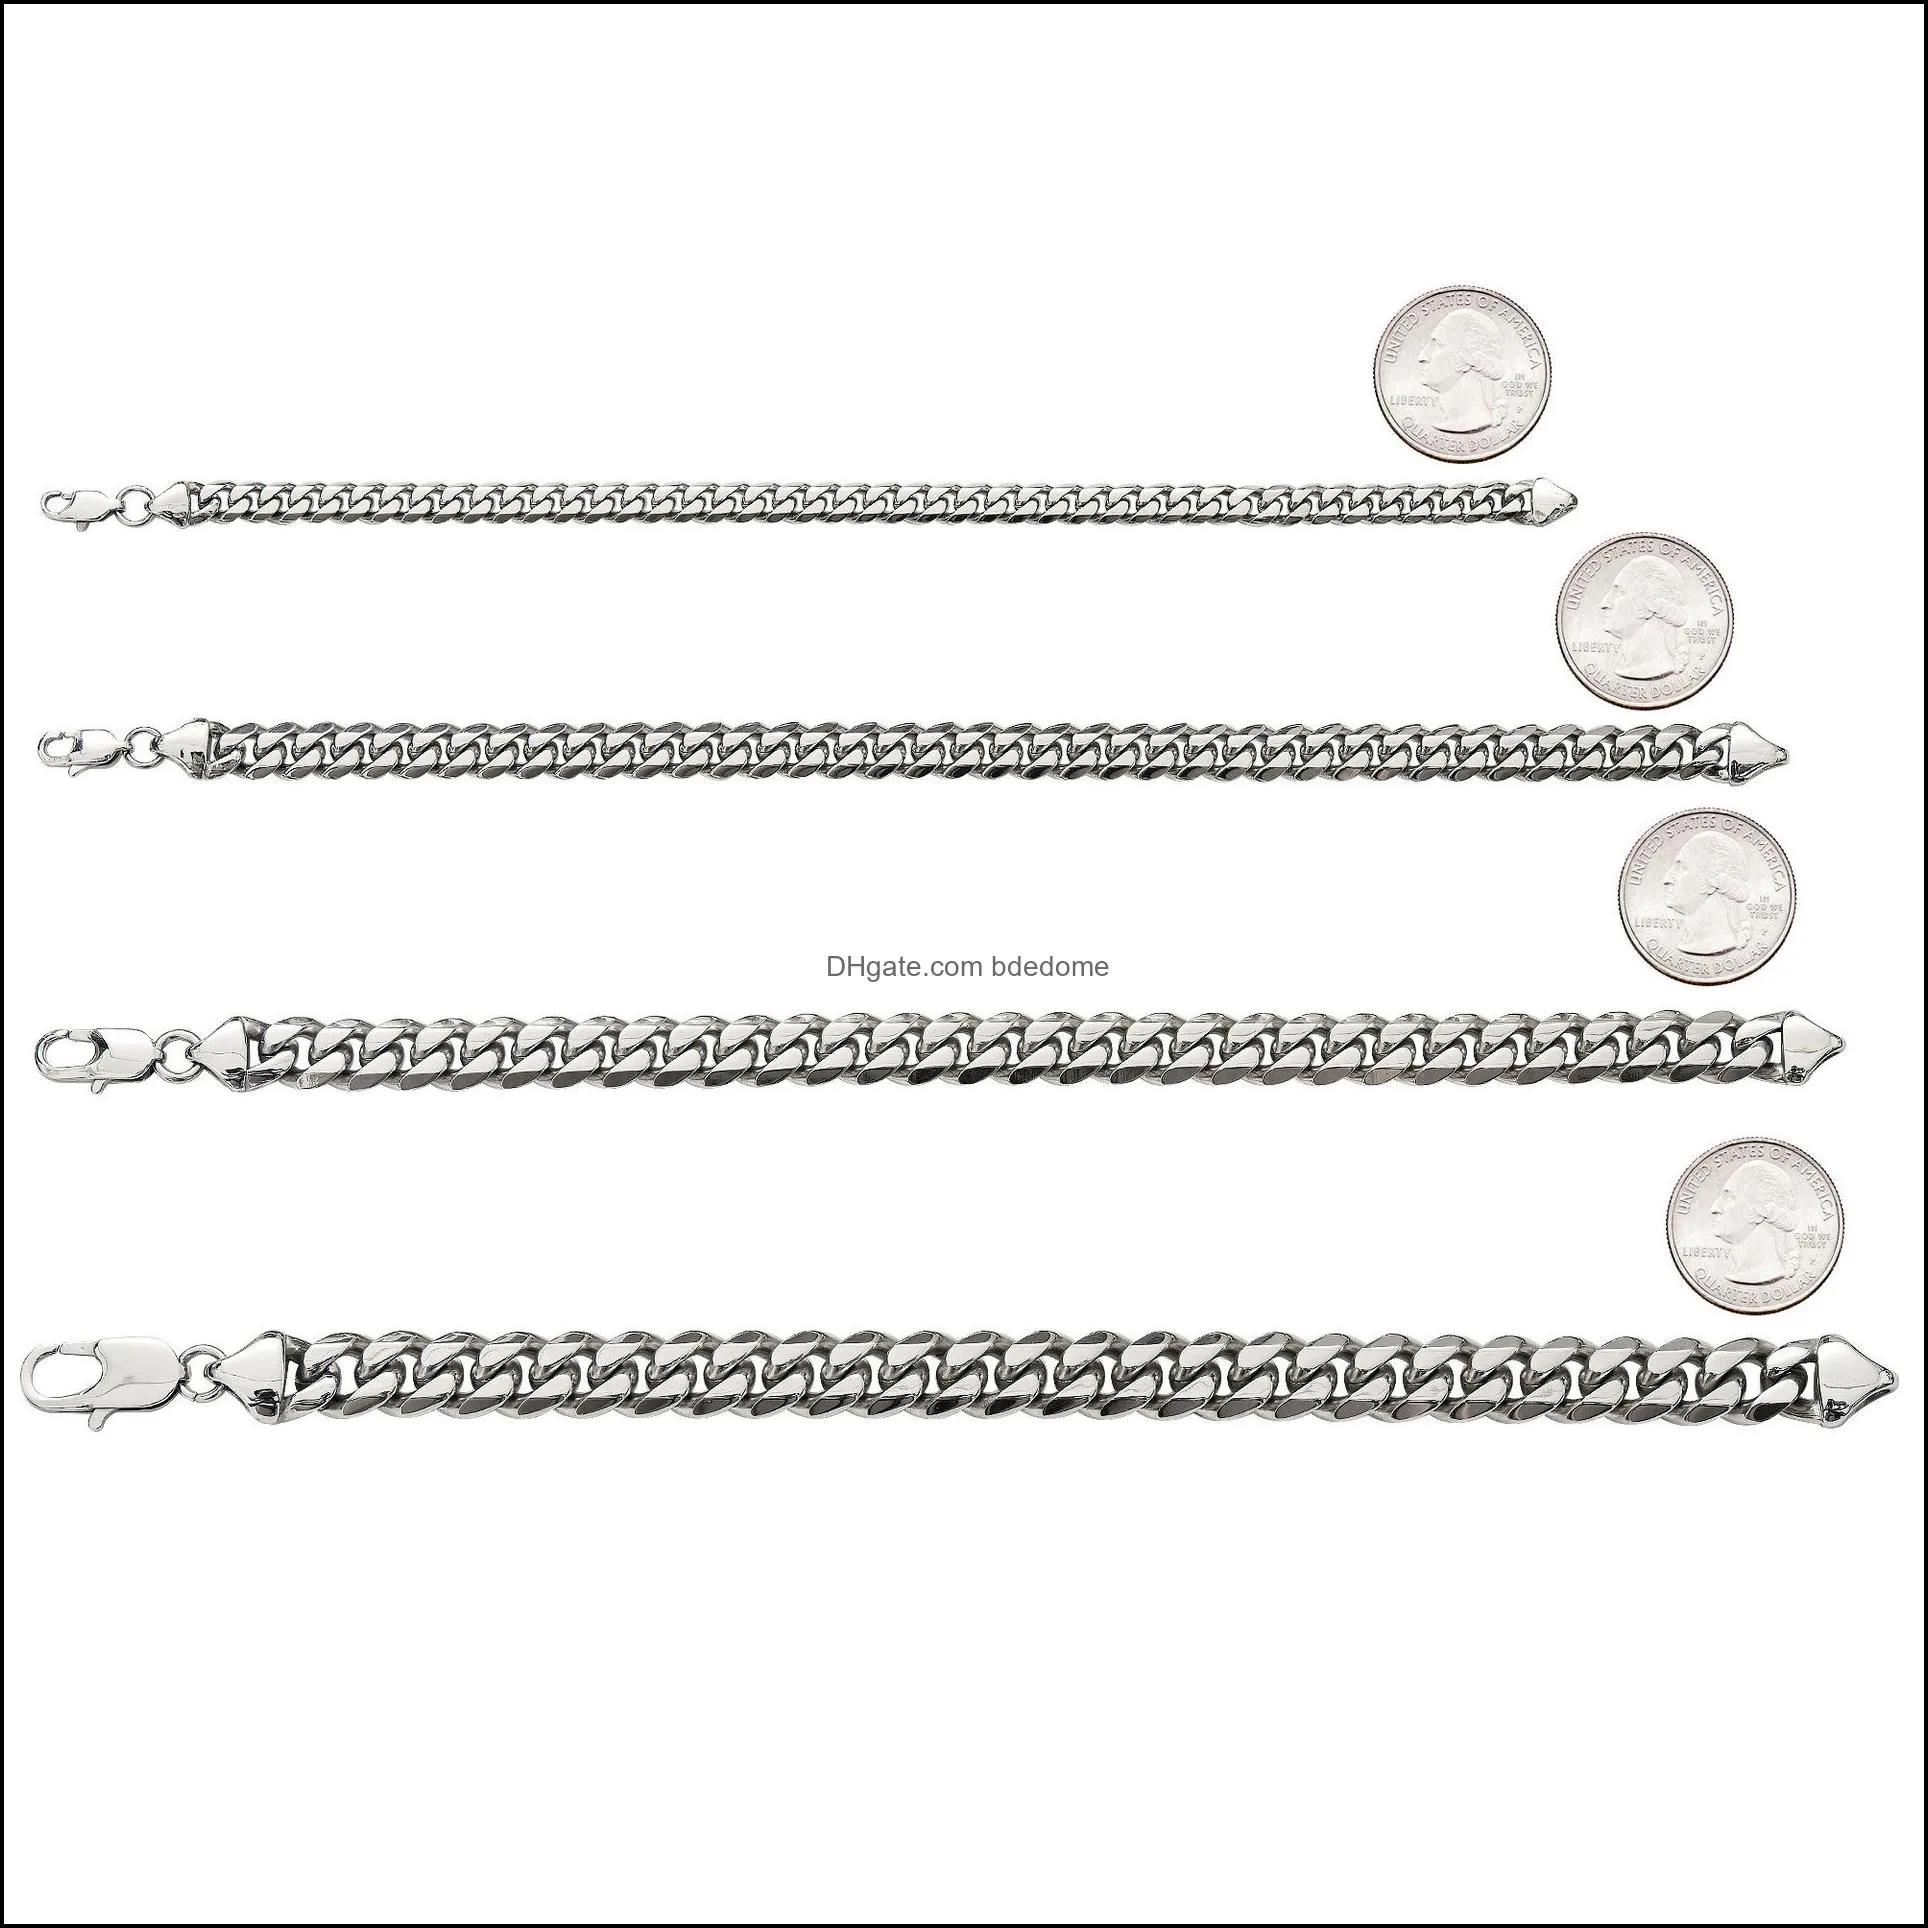 stainless steel cuban link chain necklace silver mens necklaces hip hop jewelry 6/8/10/12mm